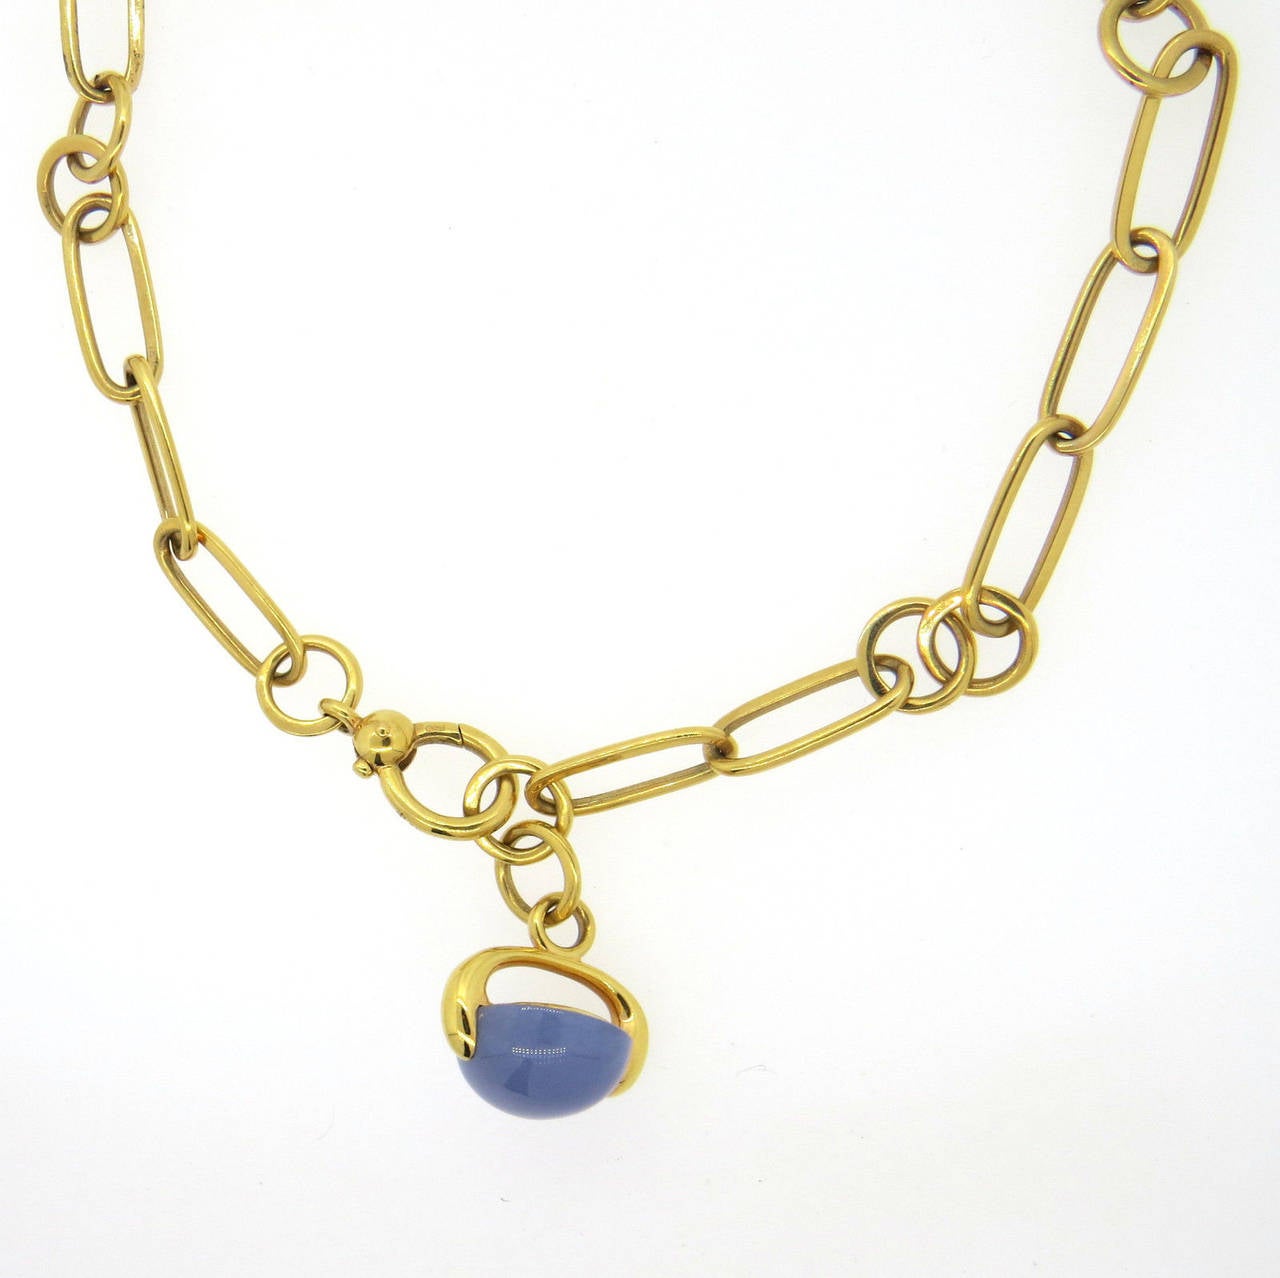 18k gold link necklace by Pomellato, crafted for Luna collection, featuring chalcedony cabochon pendant. Necklace is 18